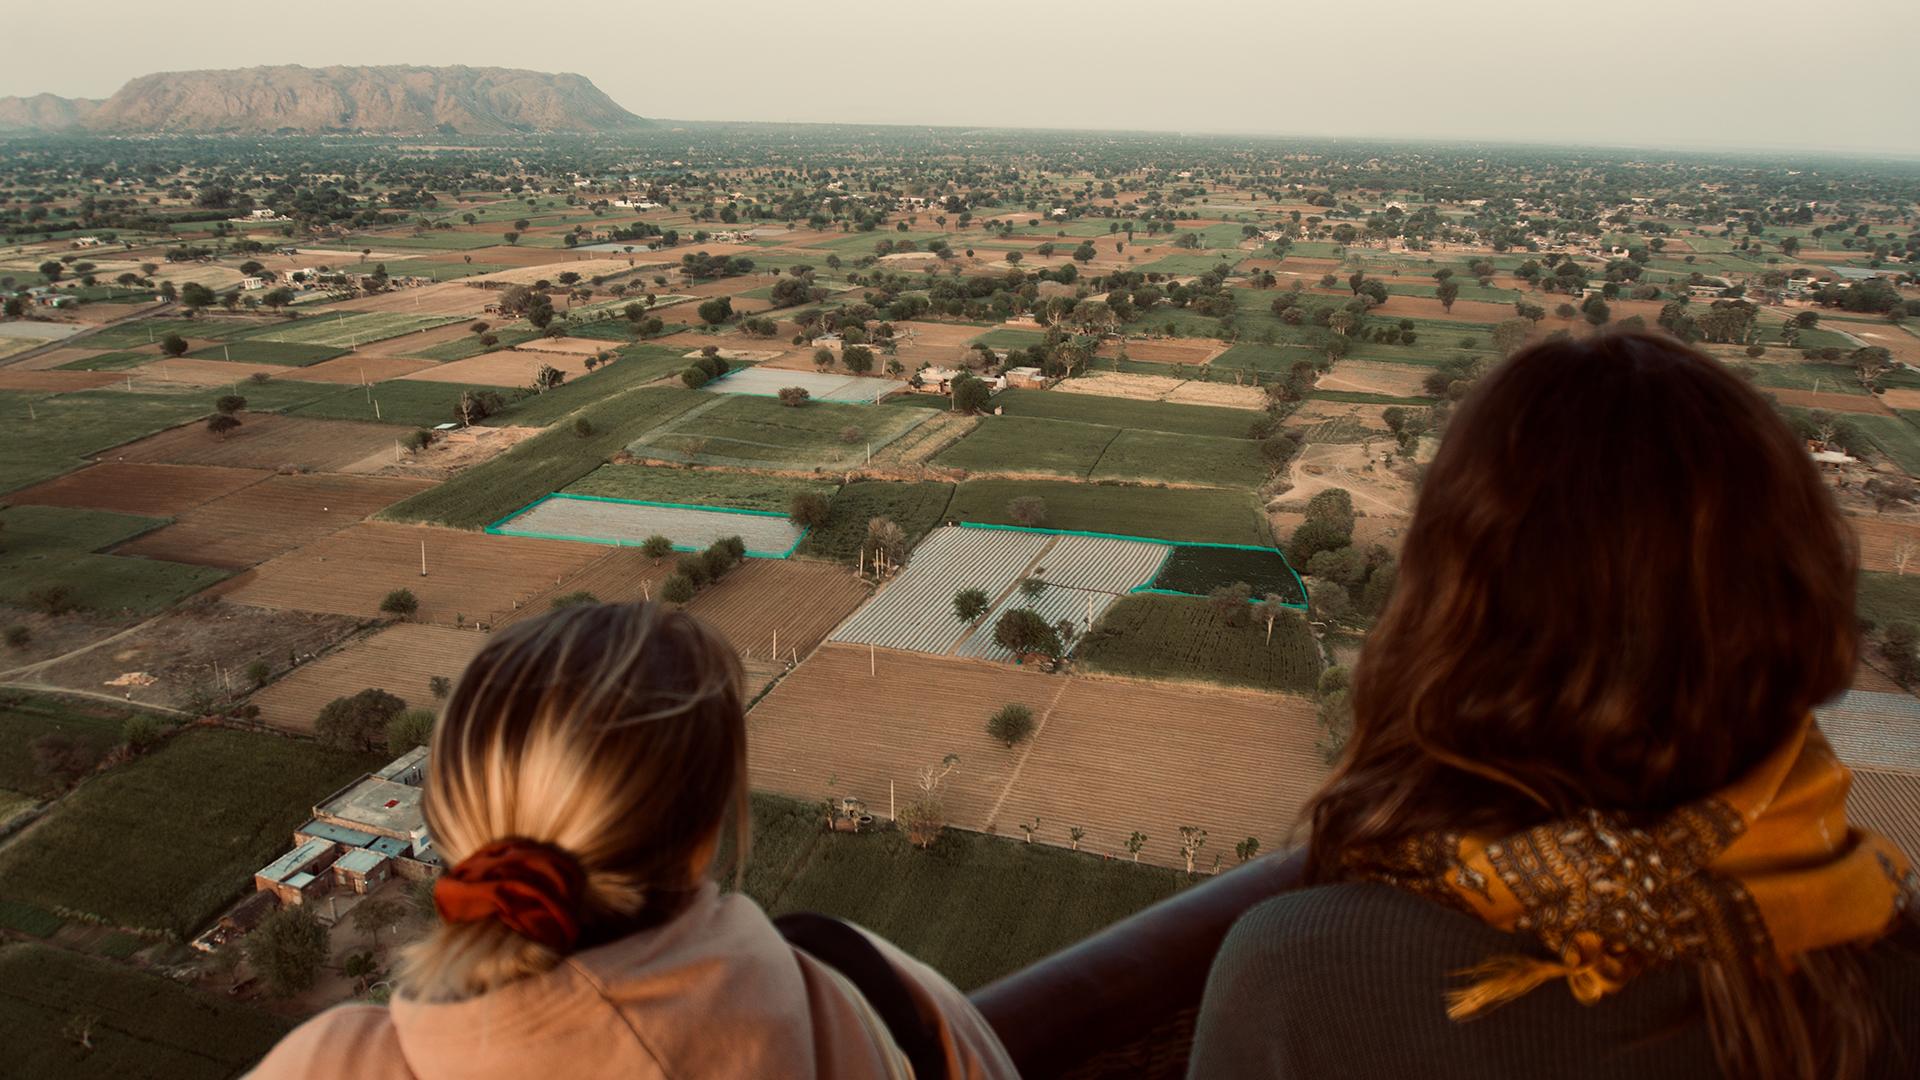 Tourism industry recovery | Two women look out over a landscape